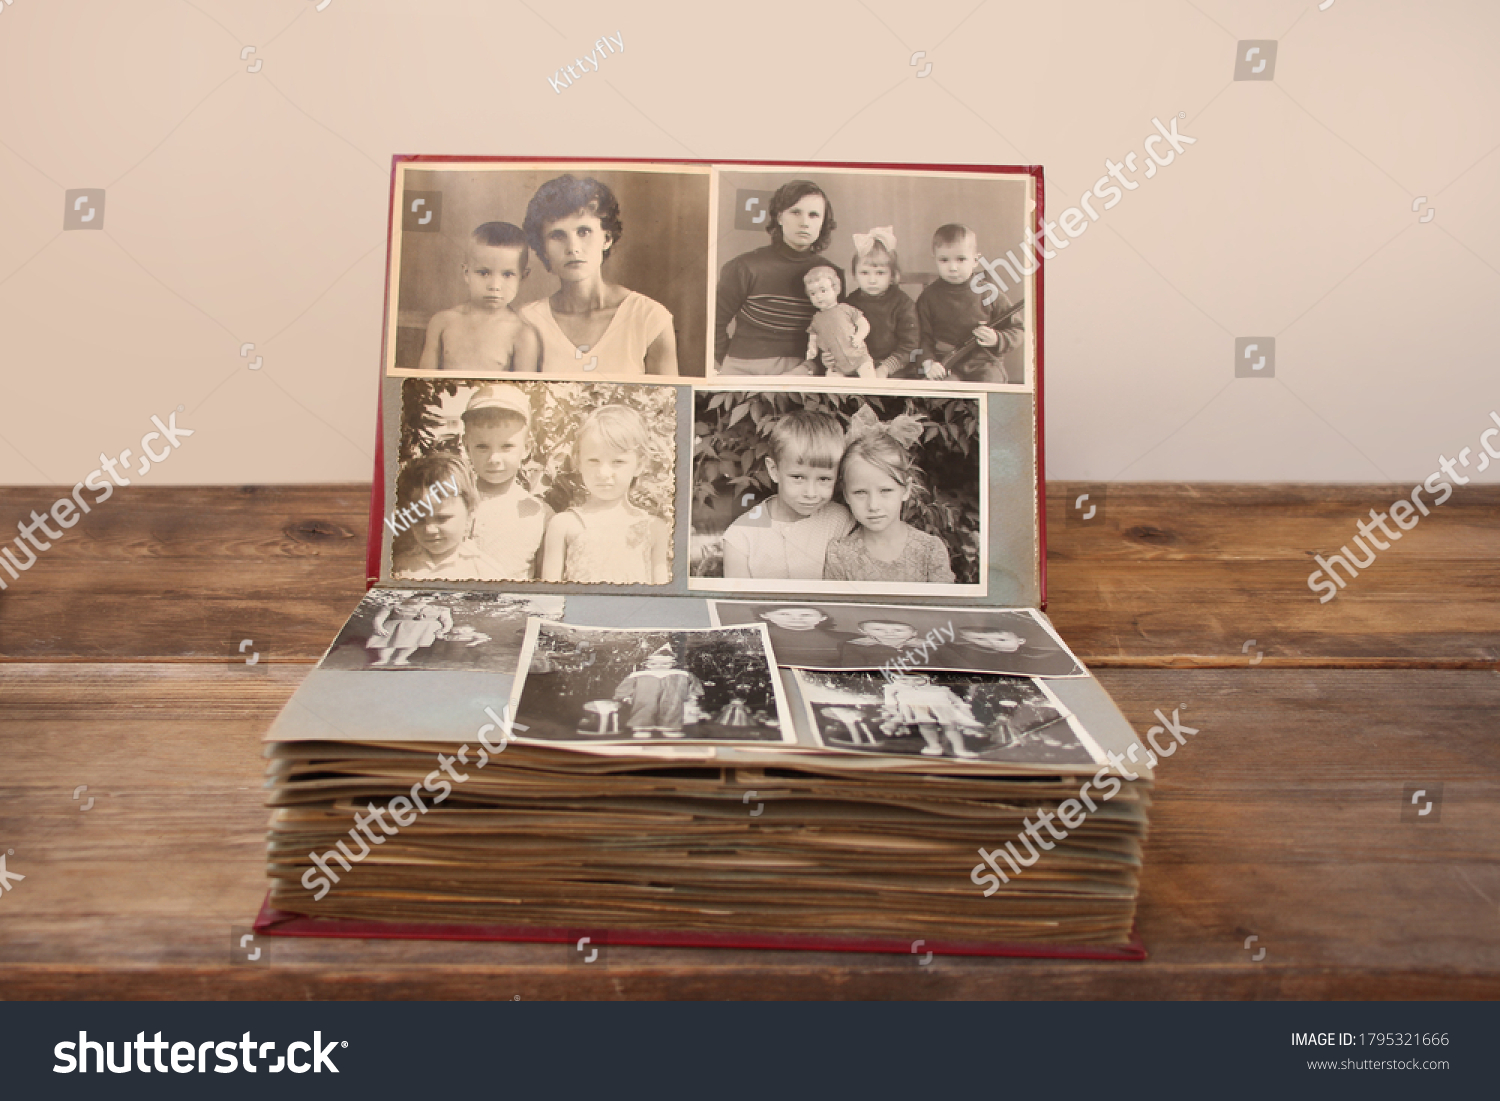 old retro album with vintage monochrome photographs in sepia color, taken in 1955-1960, concept of genealogy, the memory of ancestors, family ties, childhood memories #1795321666